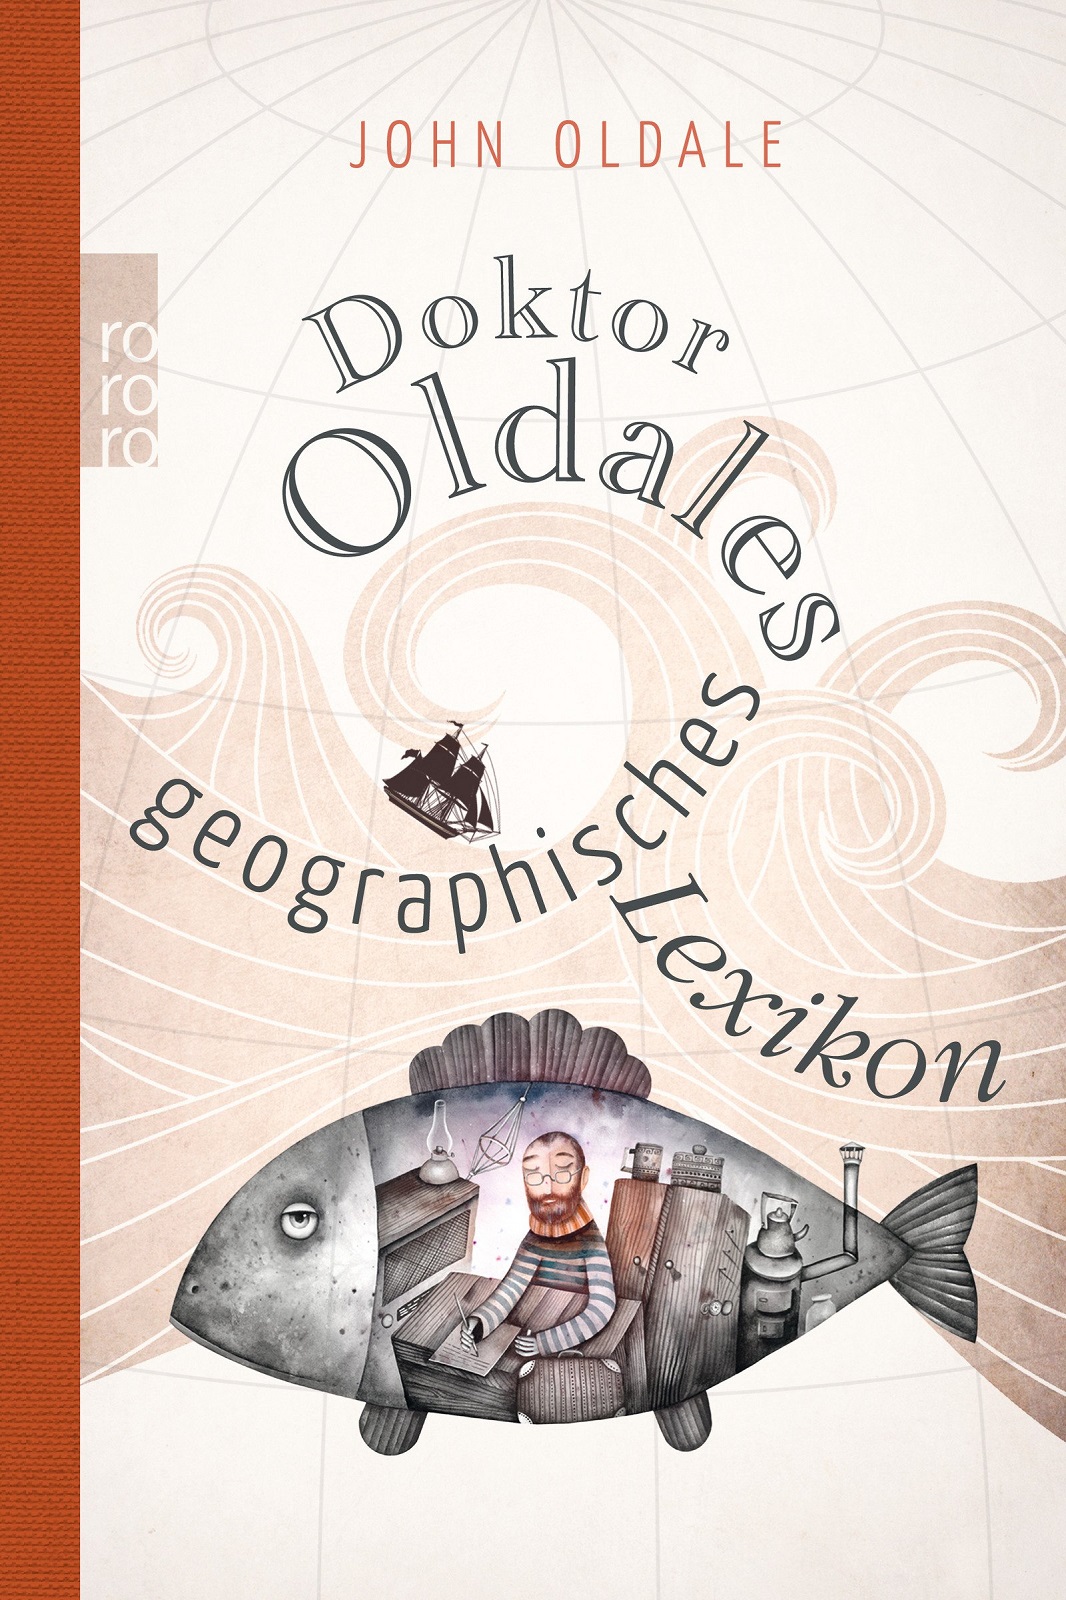 Doktor Oldales geographisches Lexikon